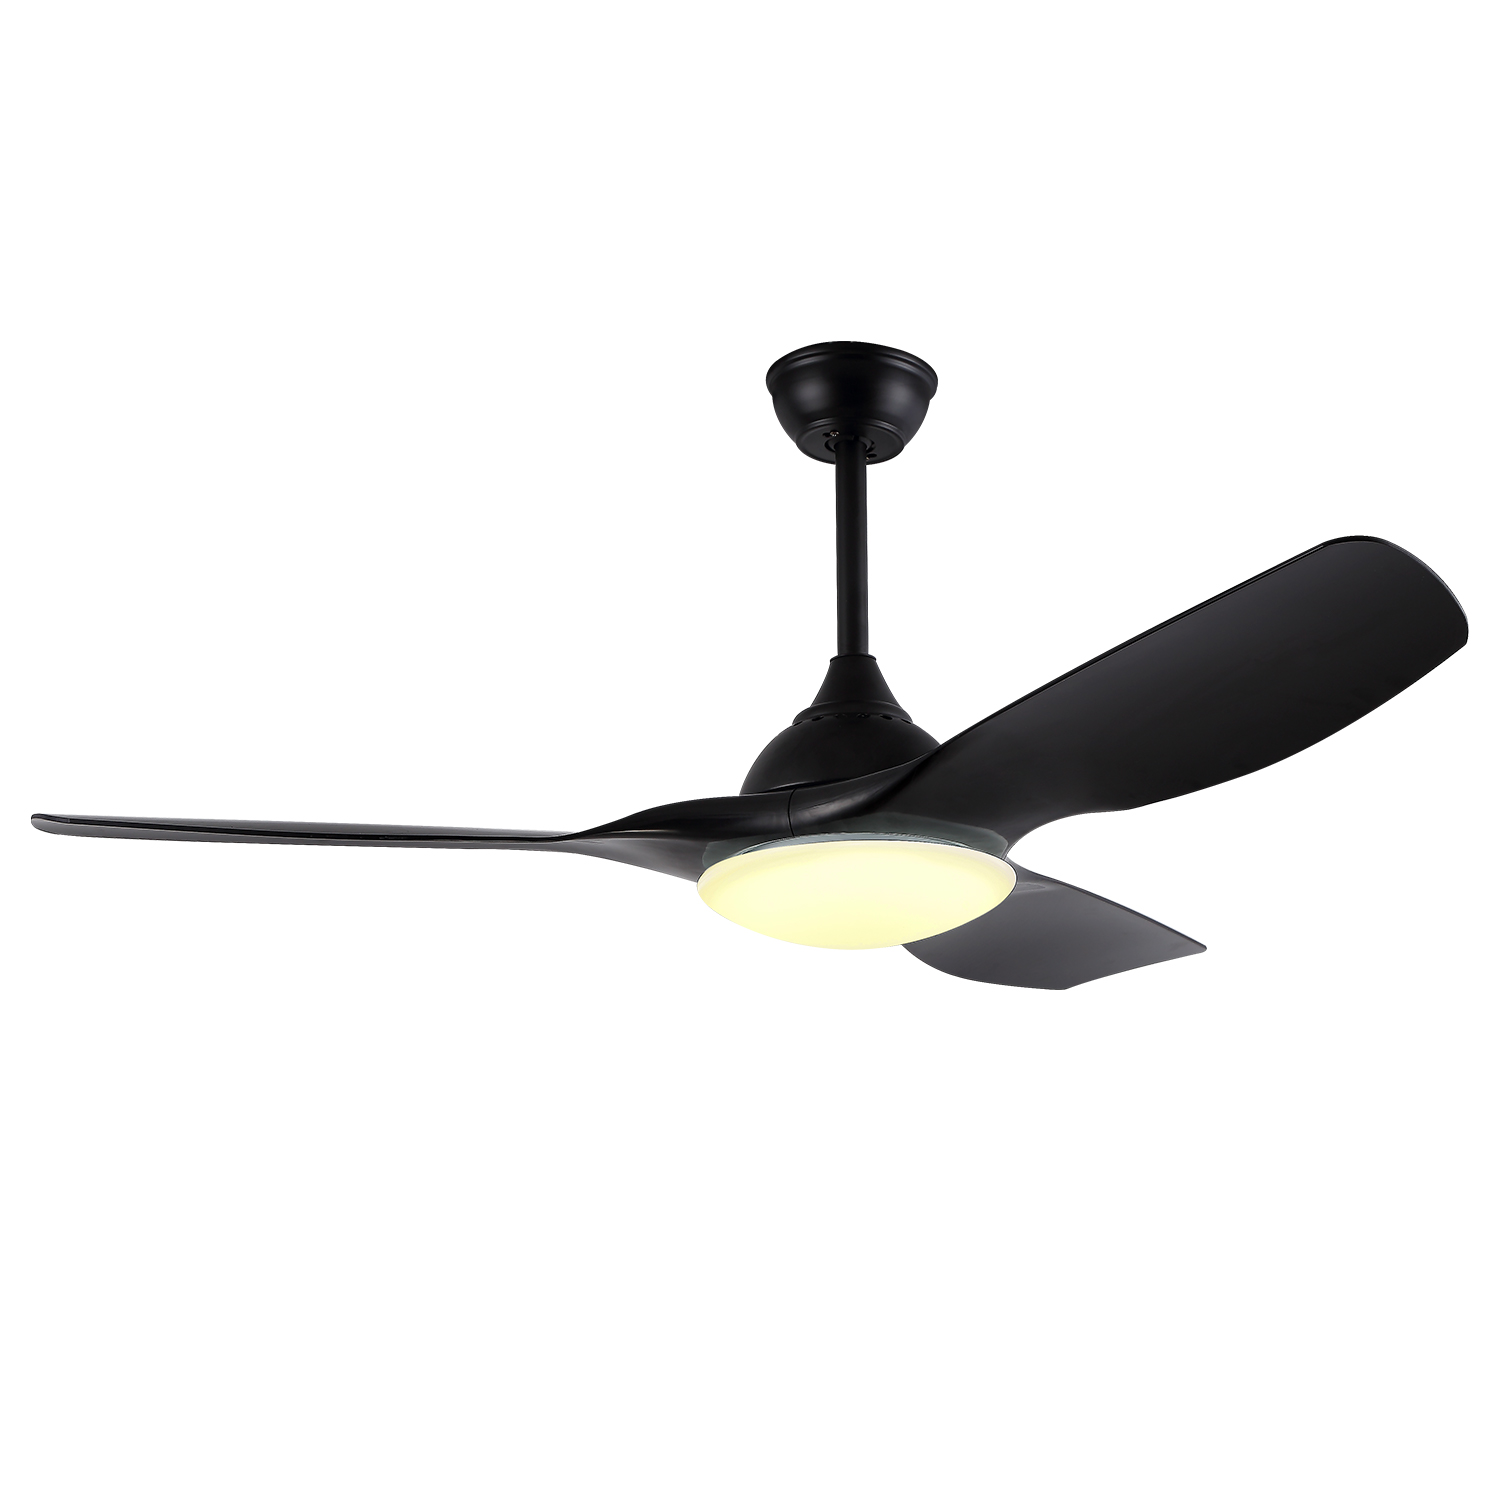 Modern Simple Cieling Fans 3 ABS Blades Fan Light Ceiling Dc Bldc Ceiling Fan with Light and Remote